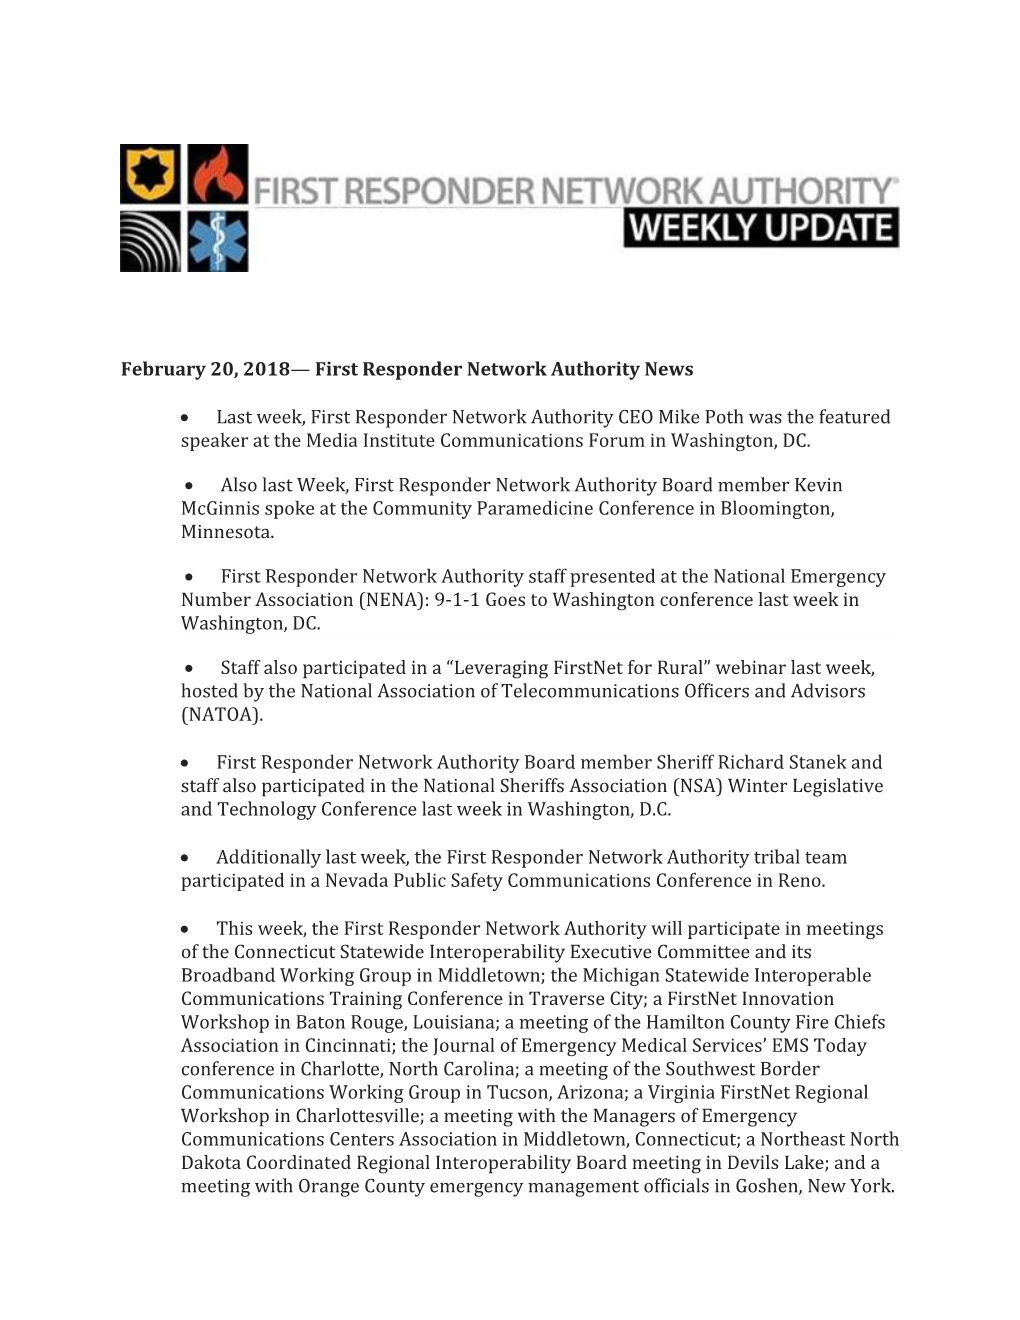 February 20, 2018 First Responder Network Authority News